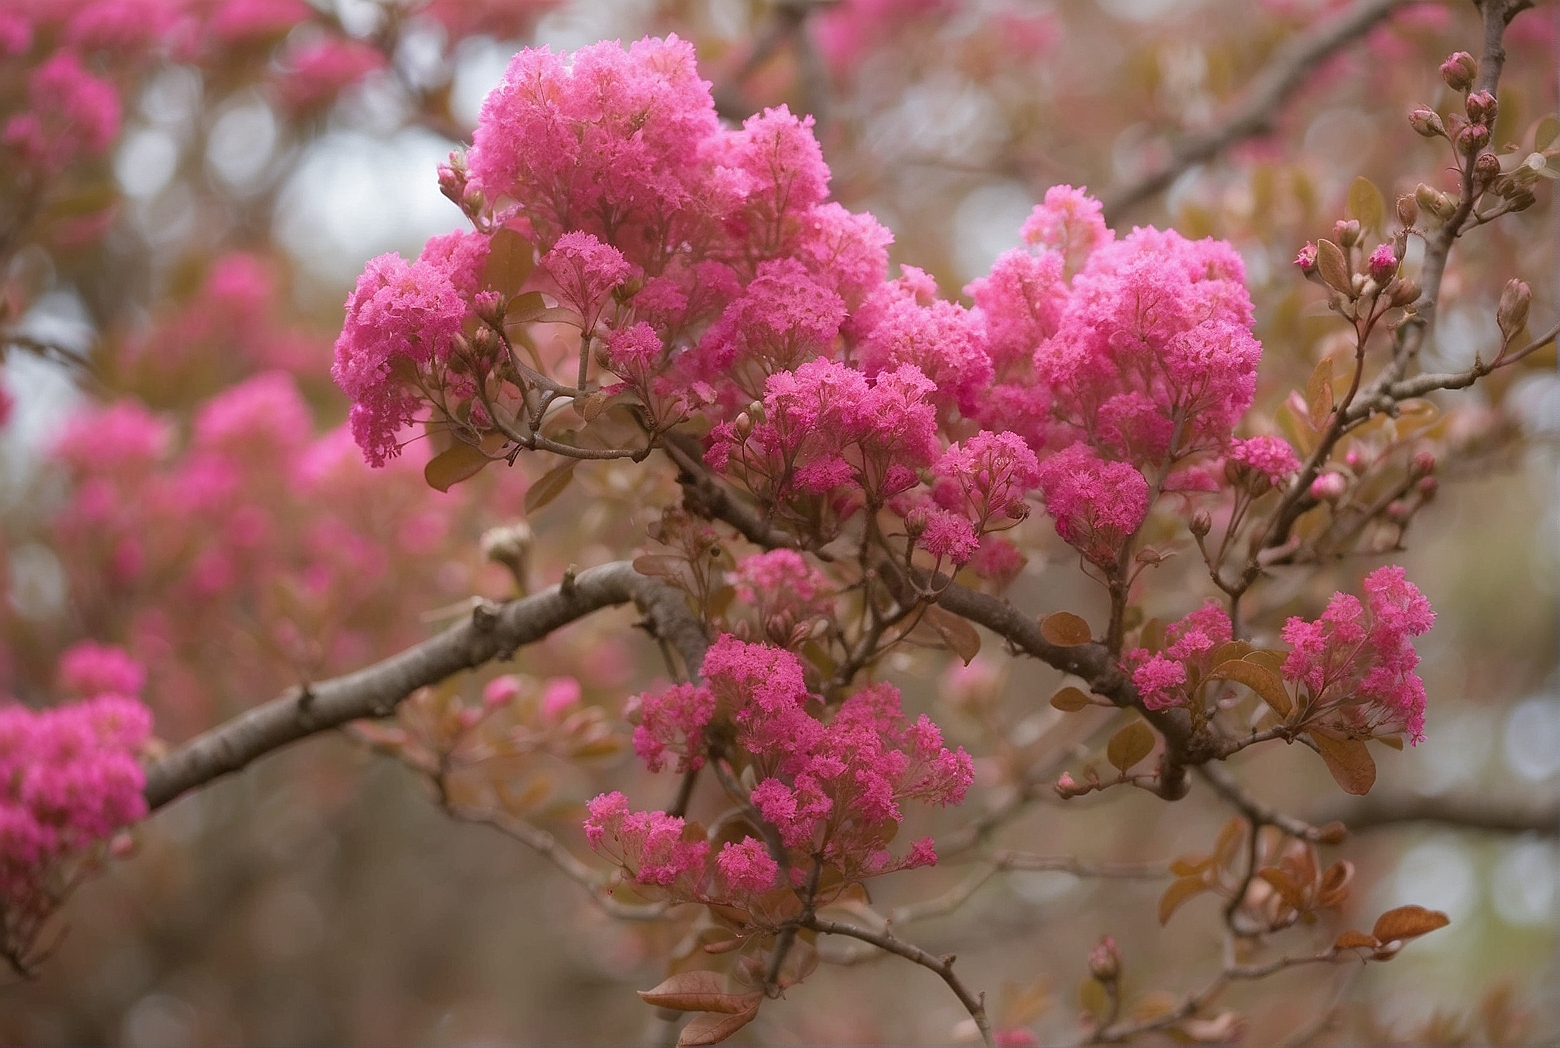 Signs that a Crepe Myrtle is Dying